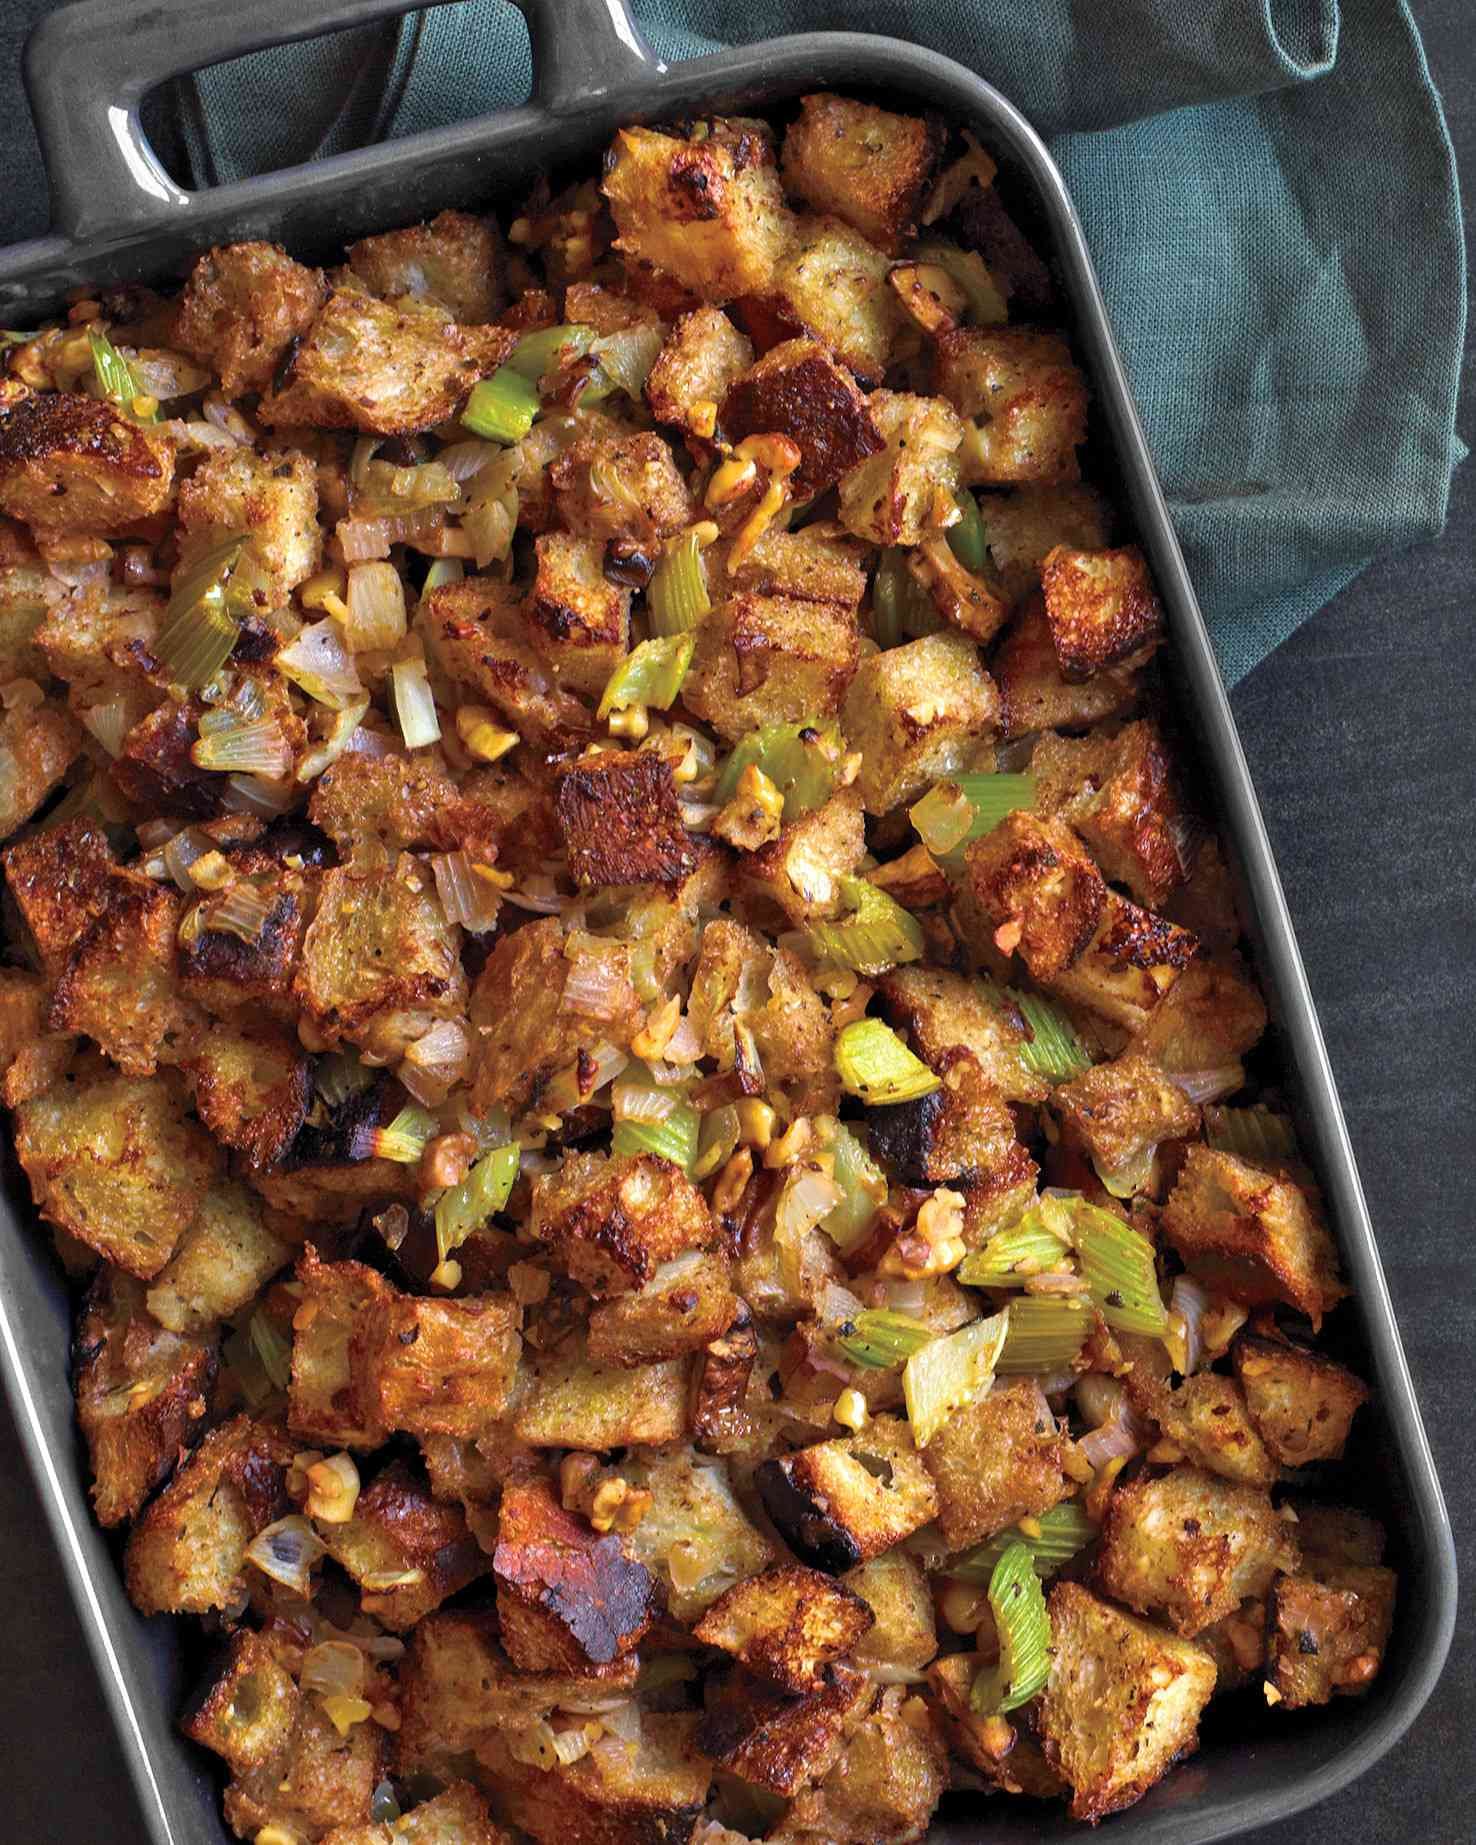 Sensational Stuffing and Dressing Recipes for Thanksgiving